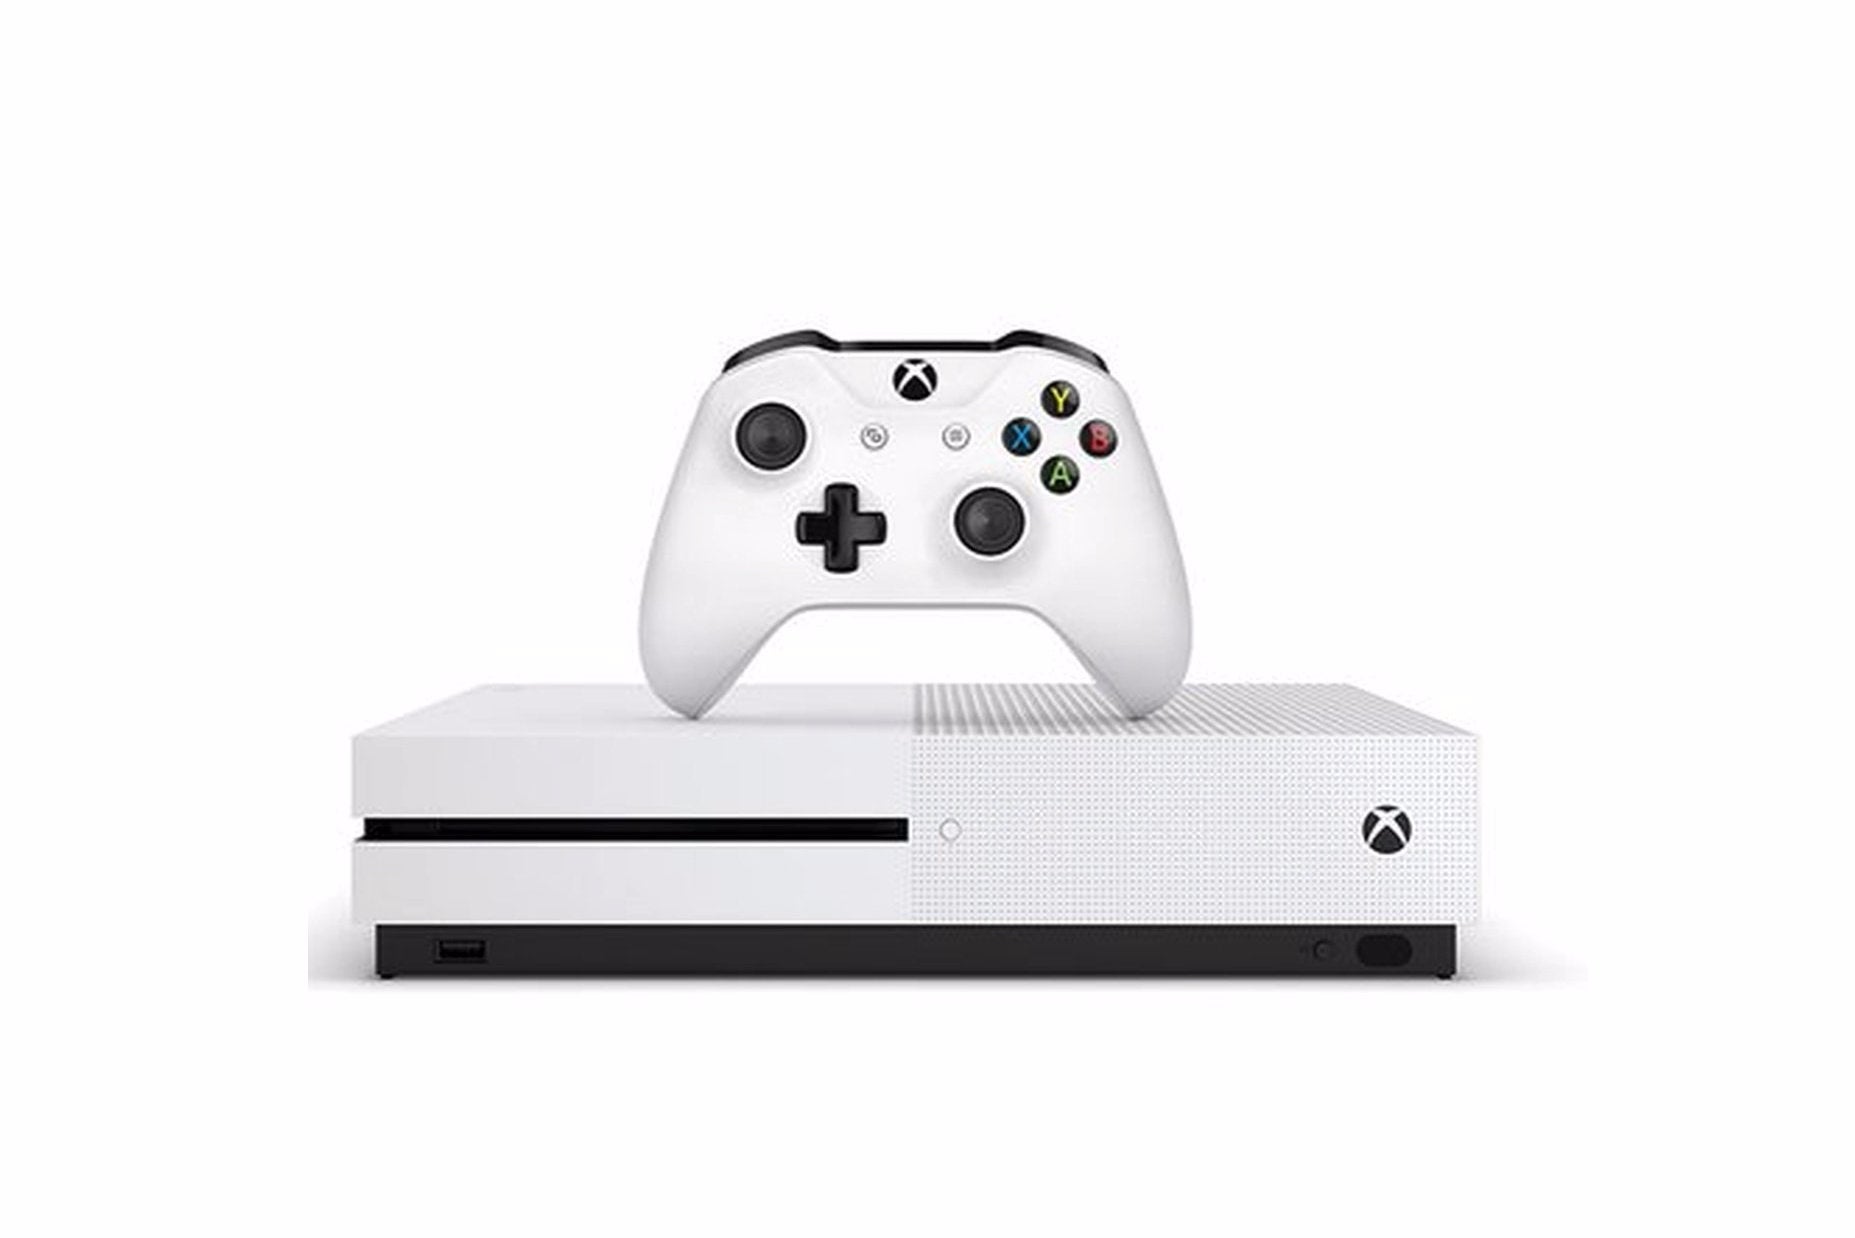 Image for E3: Microsoft announces Xbox One S, Scorpio and Play Anywhere